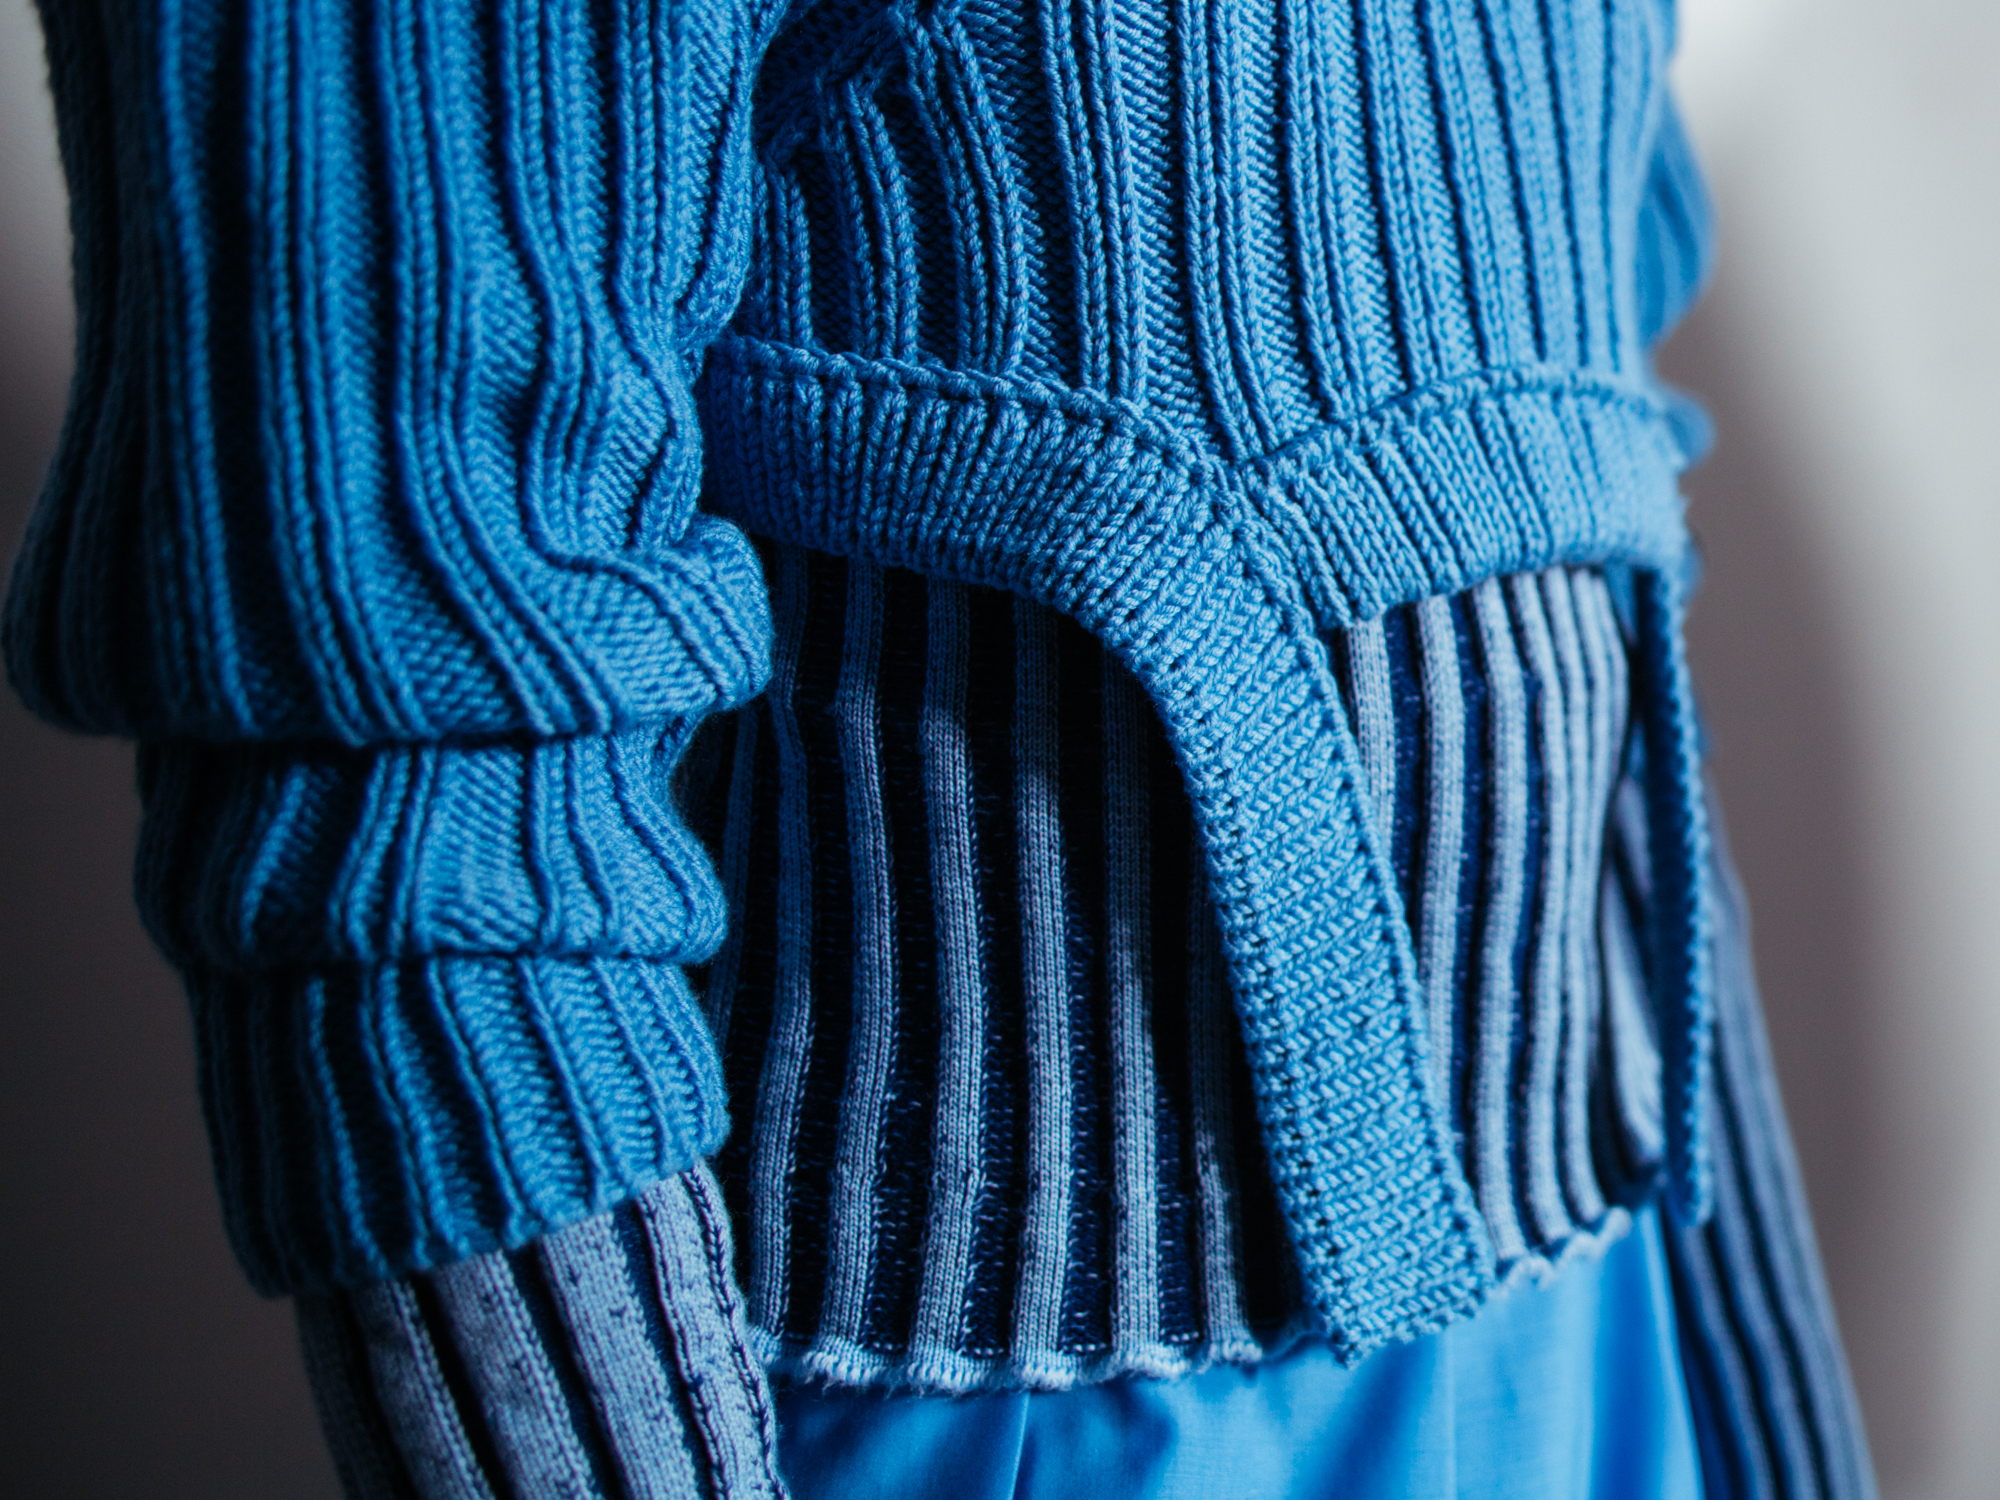 Module 6: Basic knit structures and knitting techniques